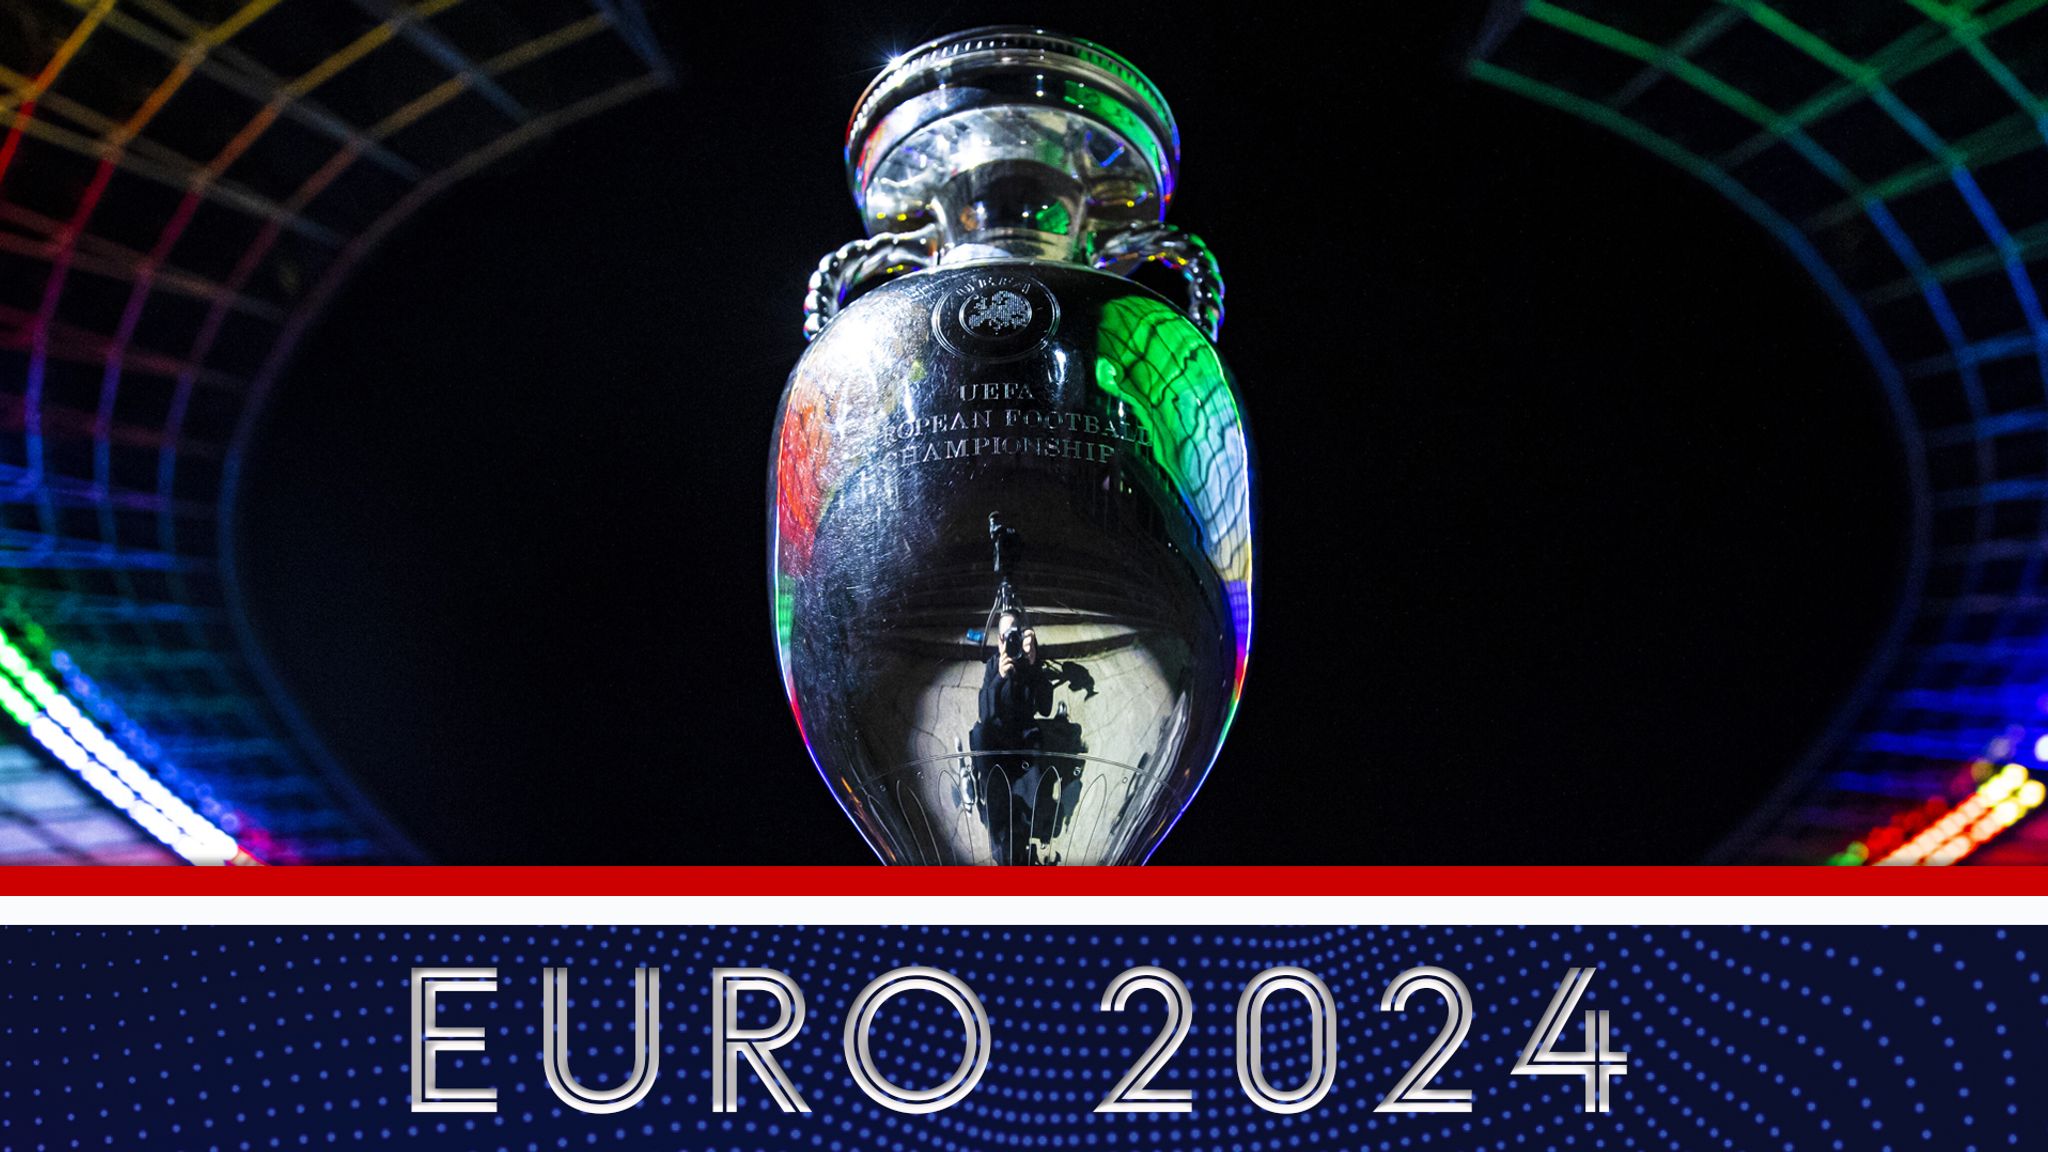 UEFA EURO 2024 qualifying draw: When was it? How did it work? Who was  seeded? | UEFA EURO 2024 | UEFA.com